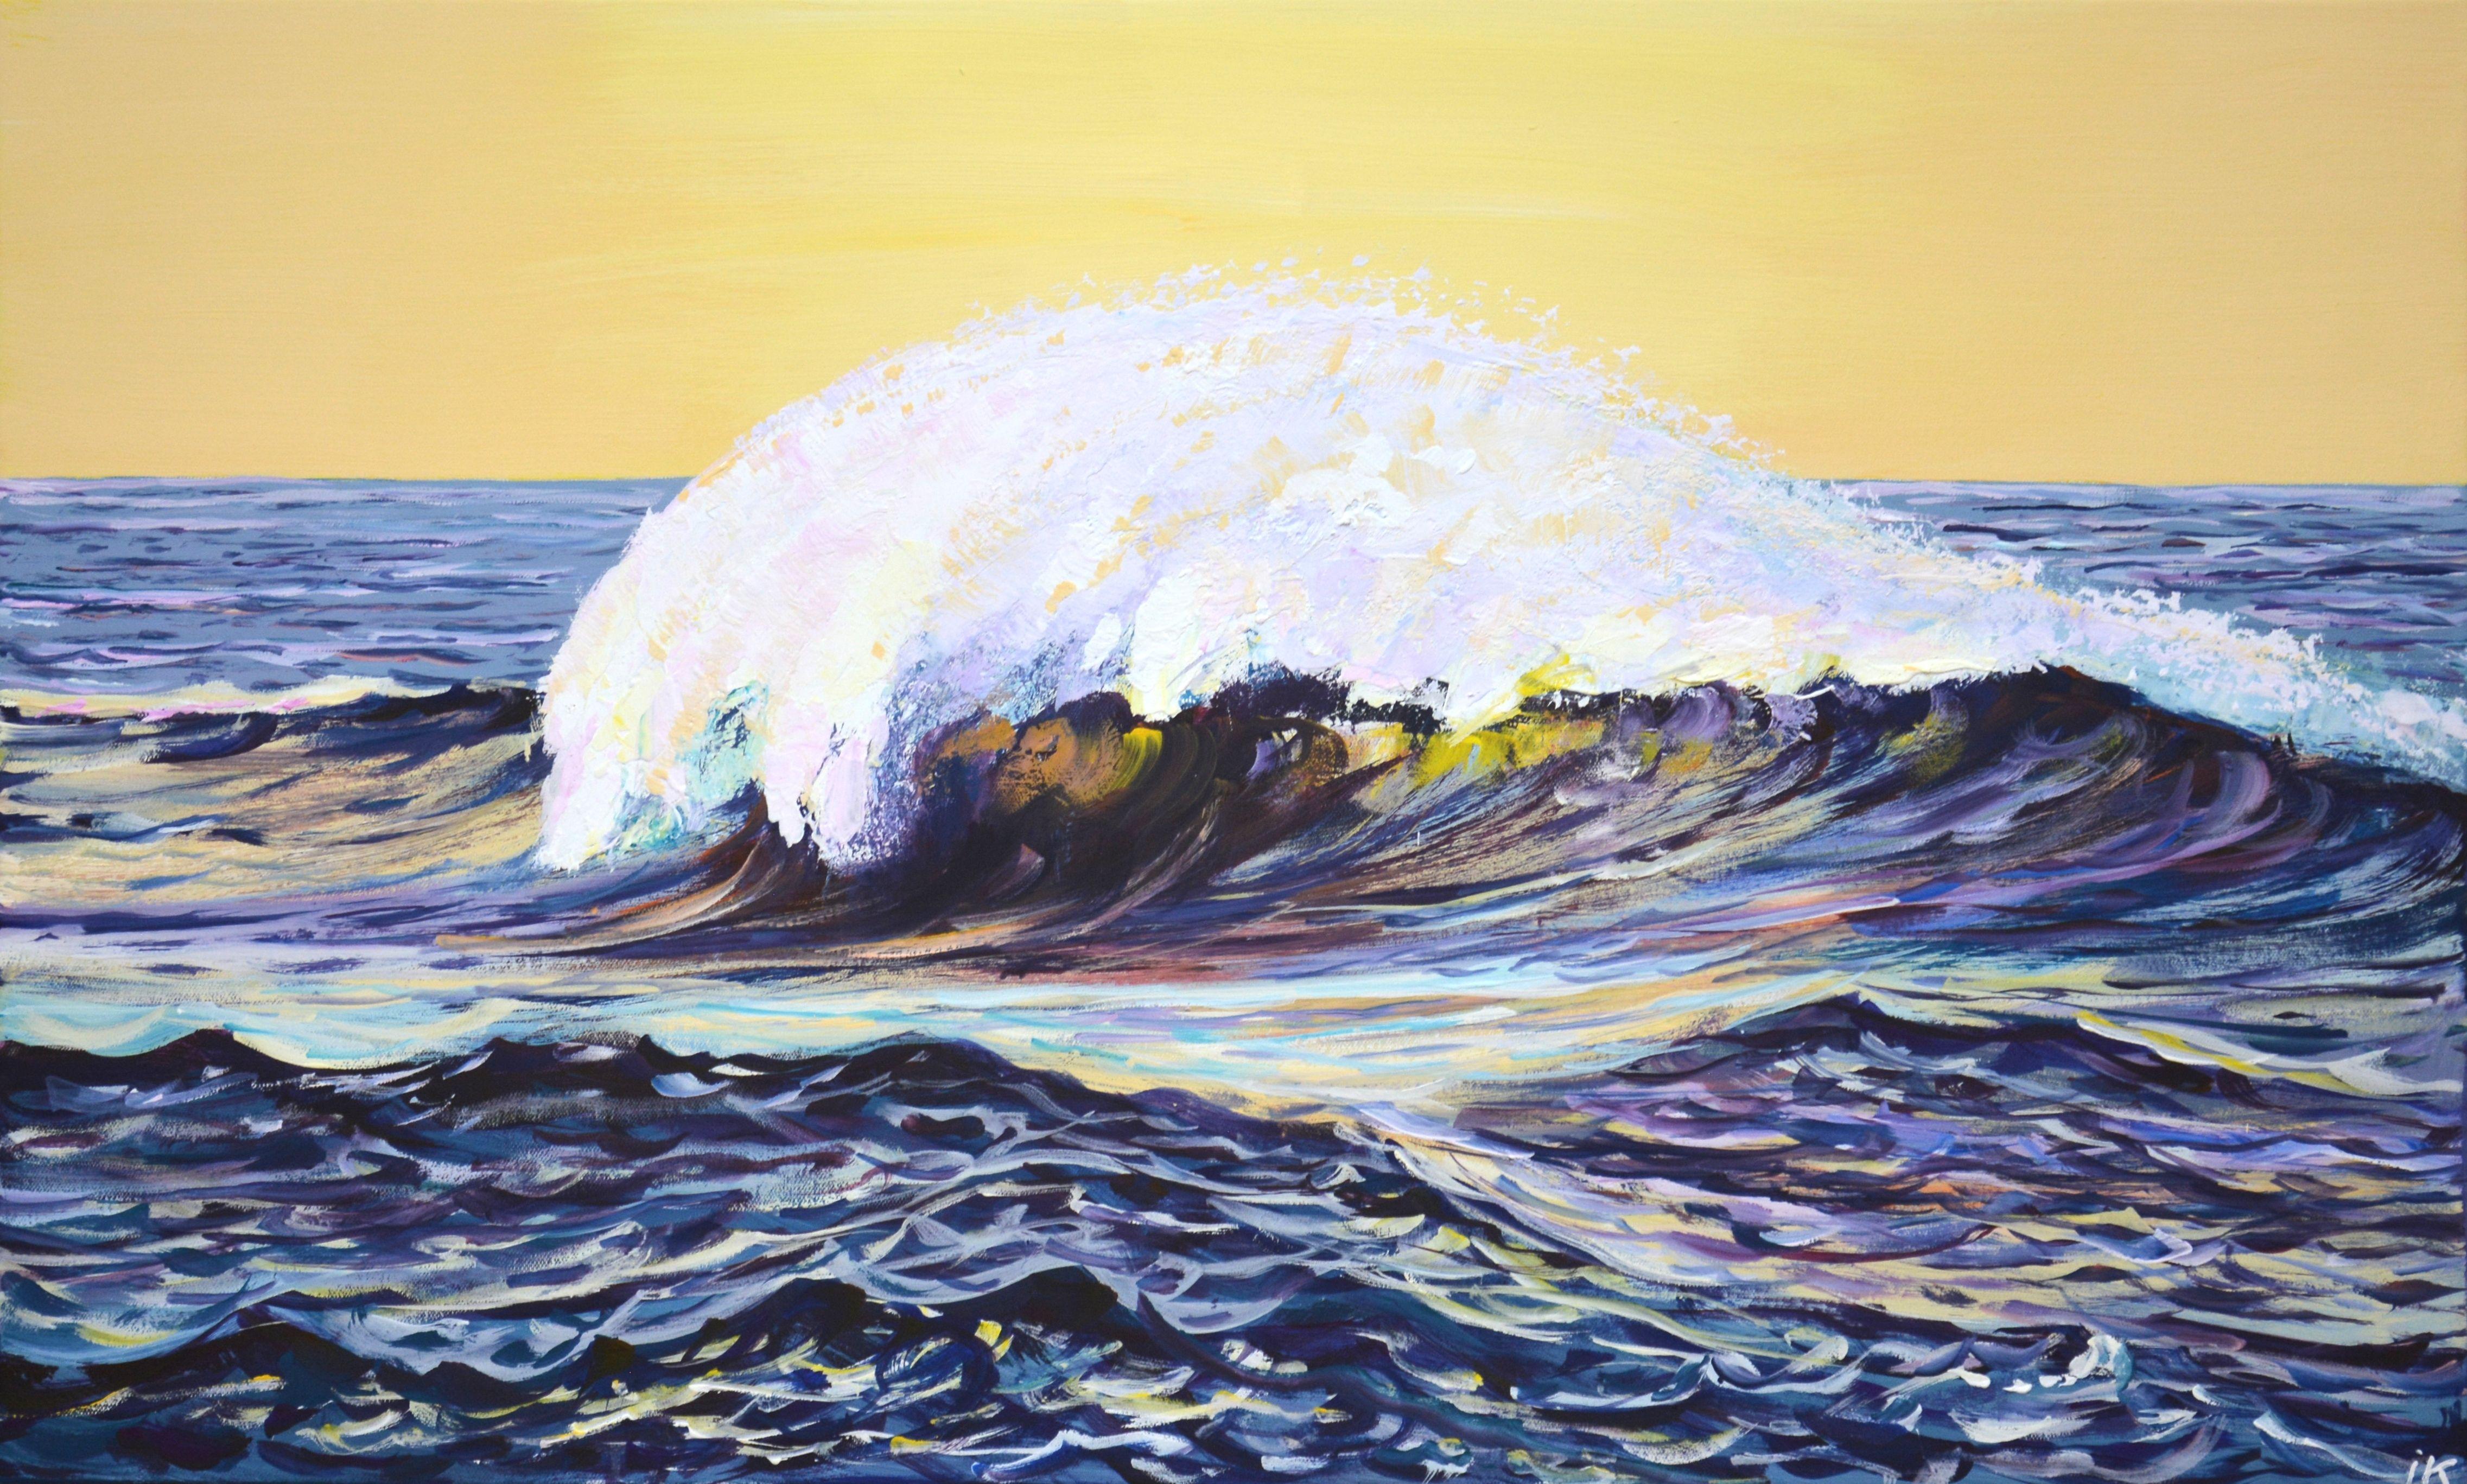 Ocean waves 2. Sunset over the ocean, light is reflected from the incoming waves, sea foam. A rich palette of blue, green, white colors emphasizes the energy of the water. Realism. Admiration for the sea element evokes a feeling of love and respect